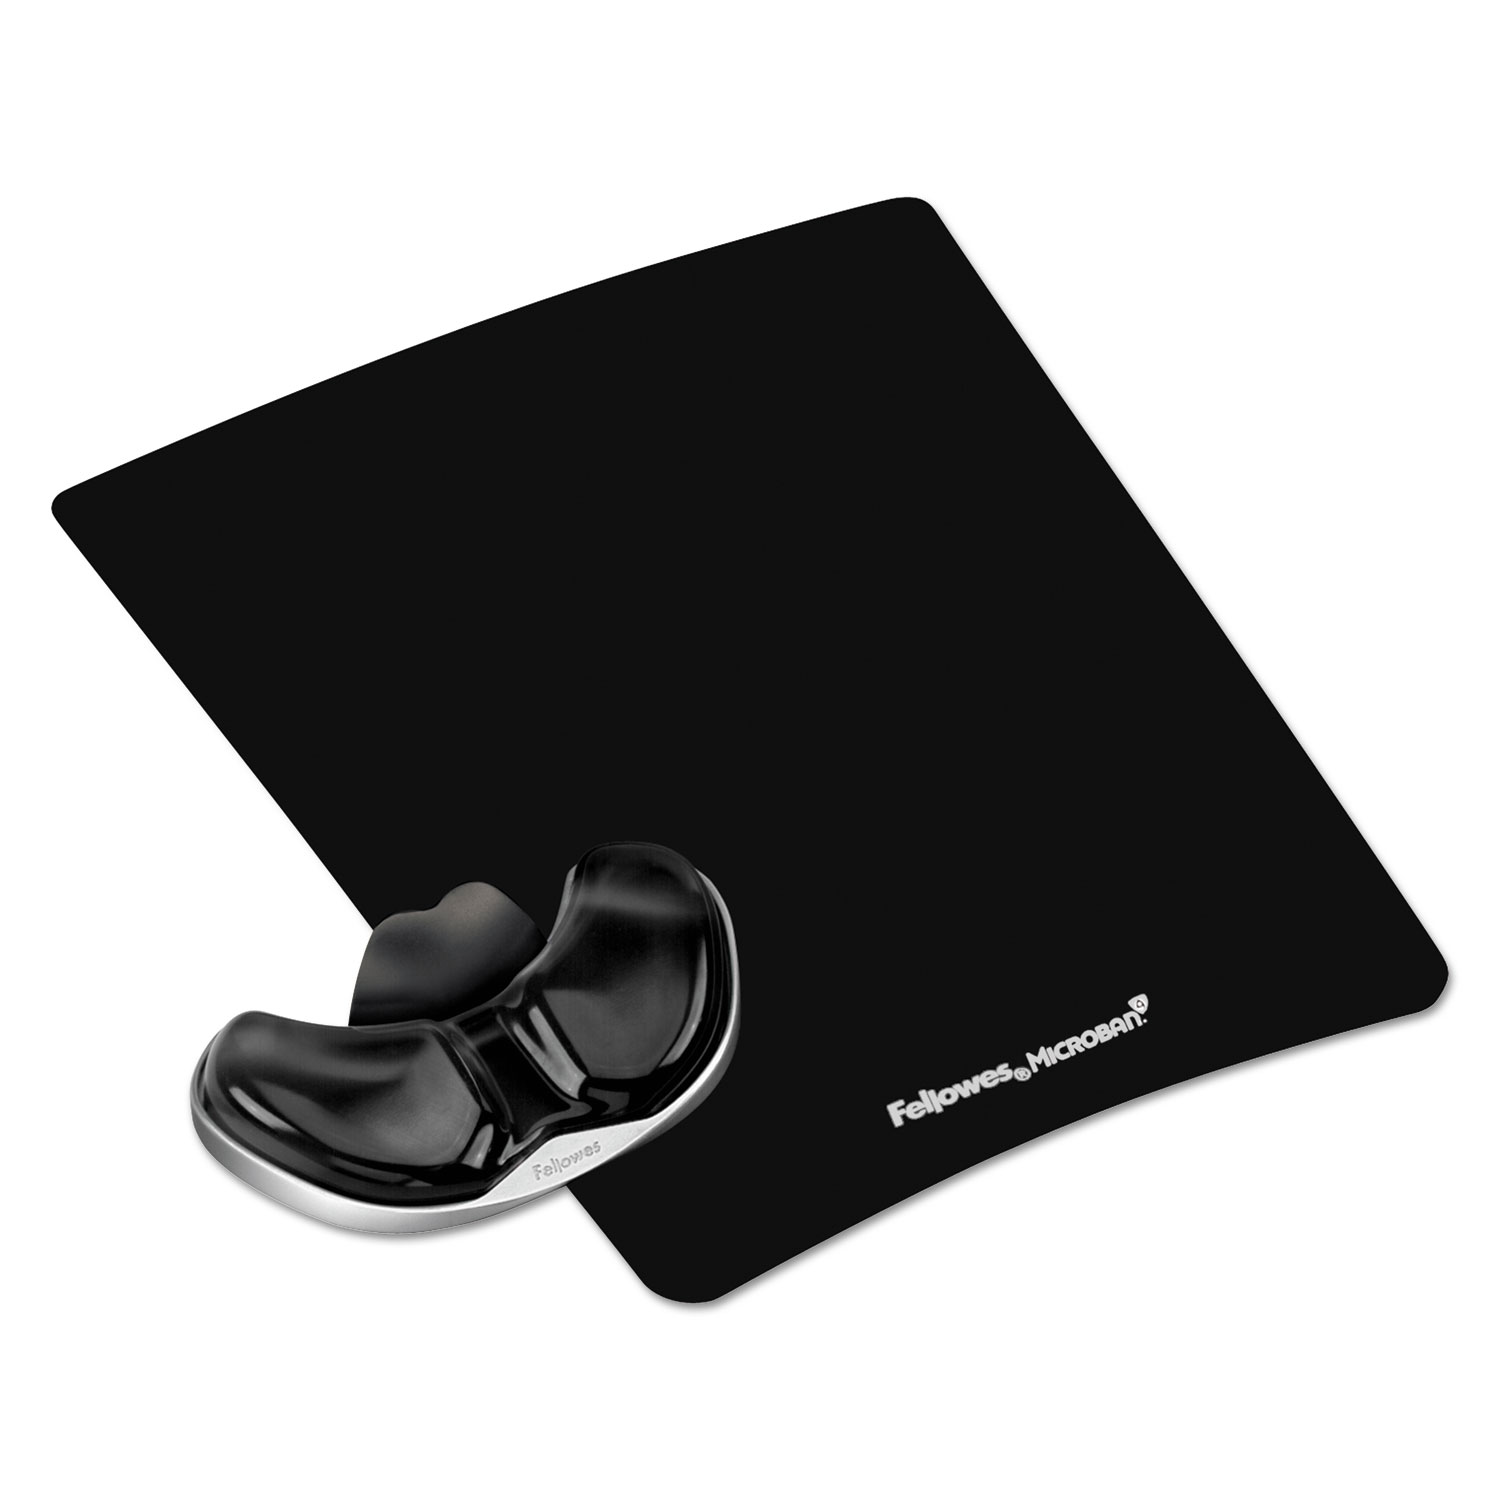  Fellowes 9180701 Gel Gliding Palm Support w/Mouse Pad, Black (FEL9180701) 